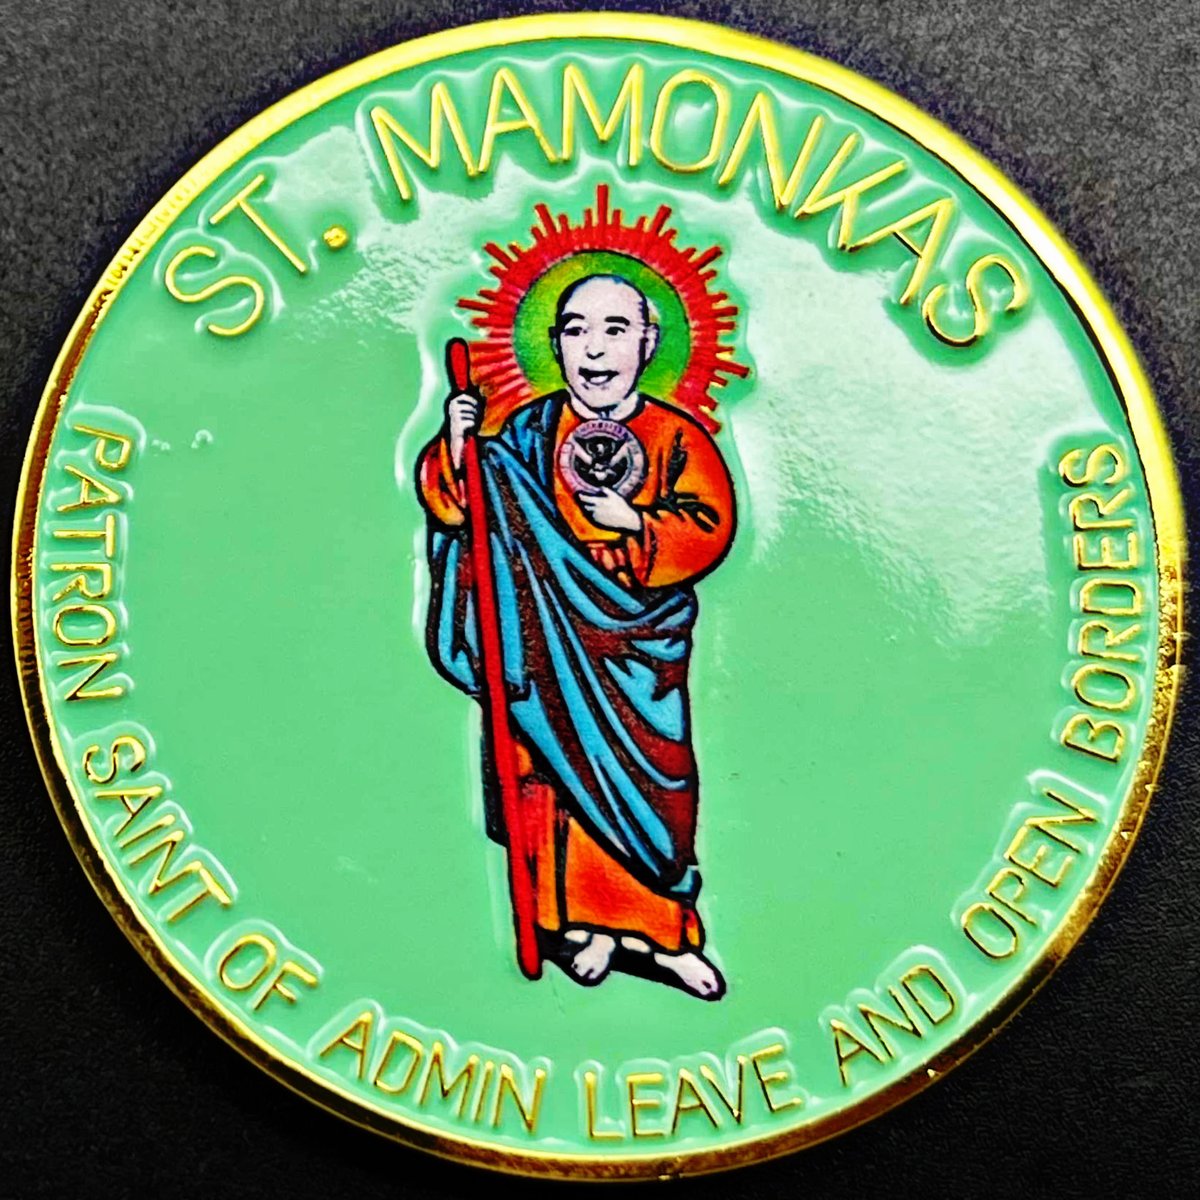 Image of ST. MAMONKAS ~ PATRON SAINT OF ADMIN LEAVE AND OPEN BORDERS COIN